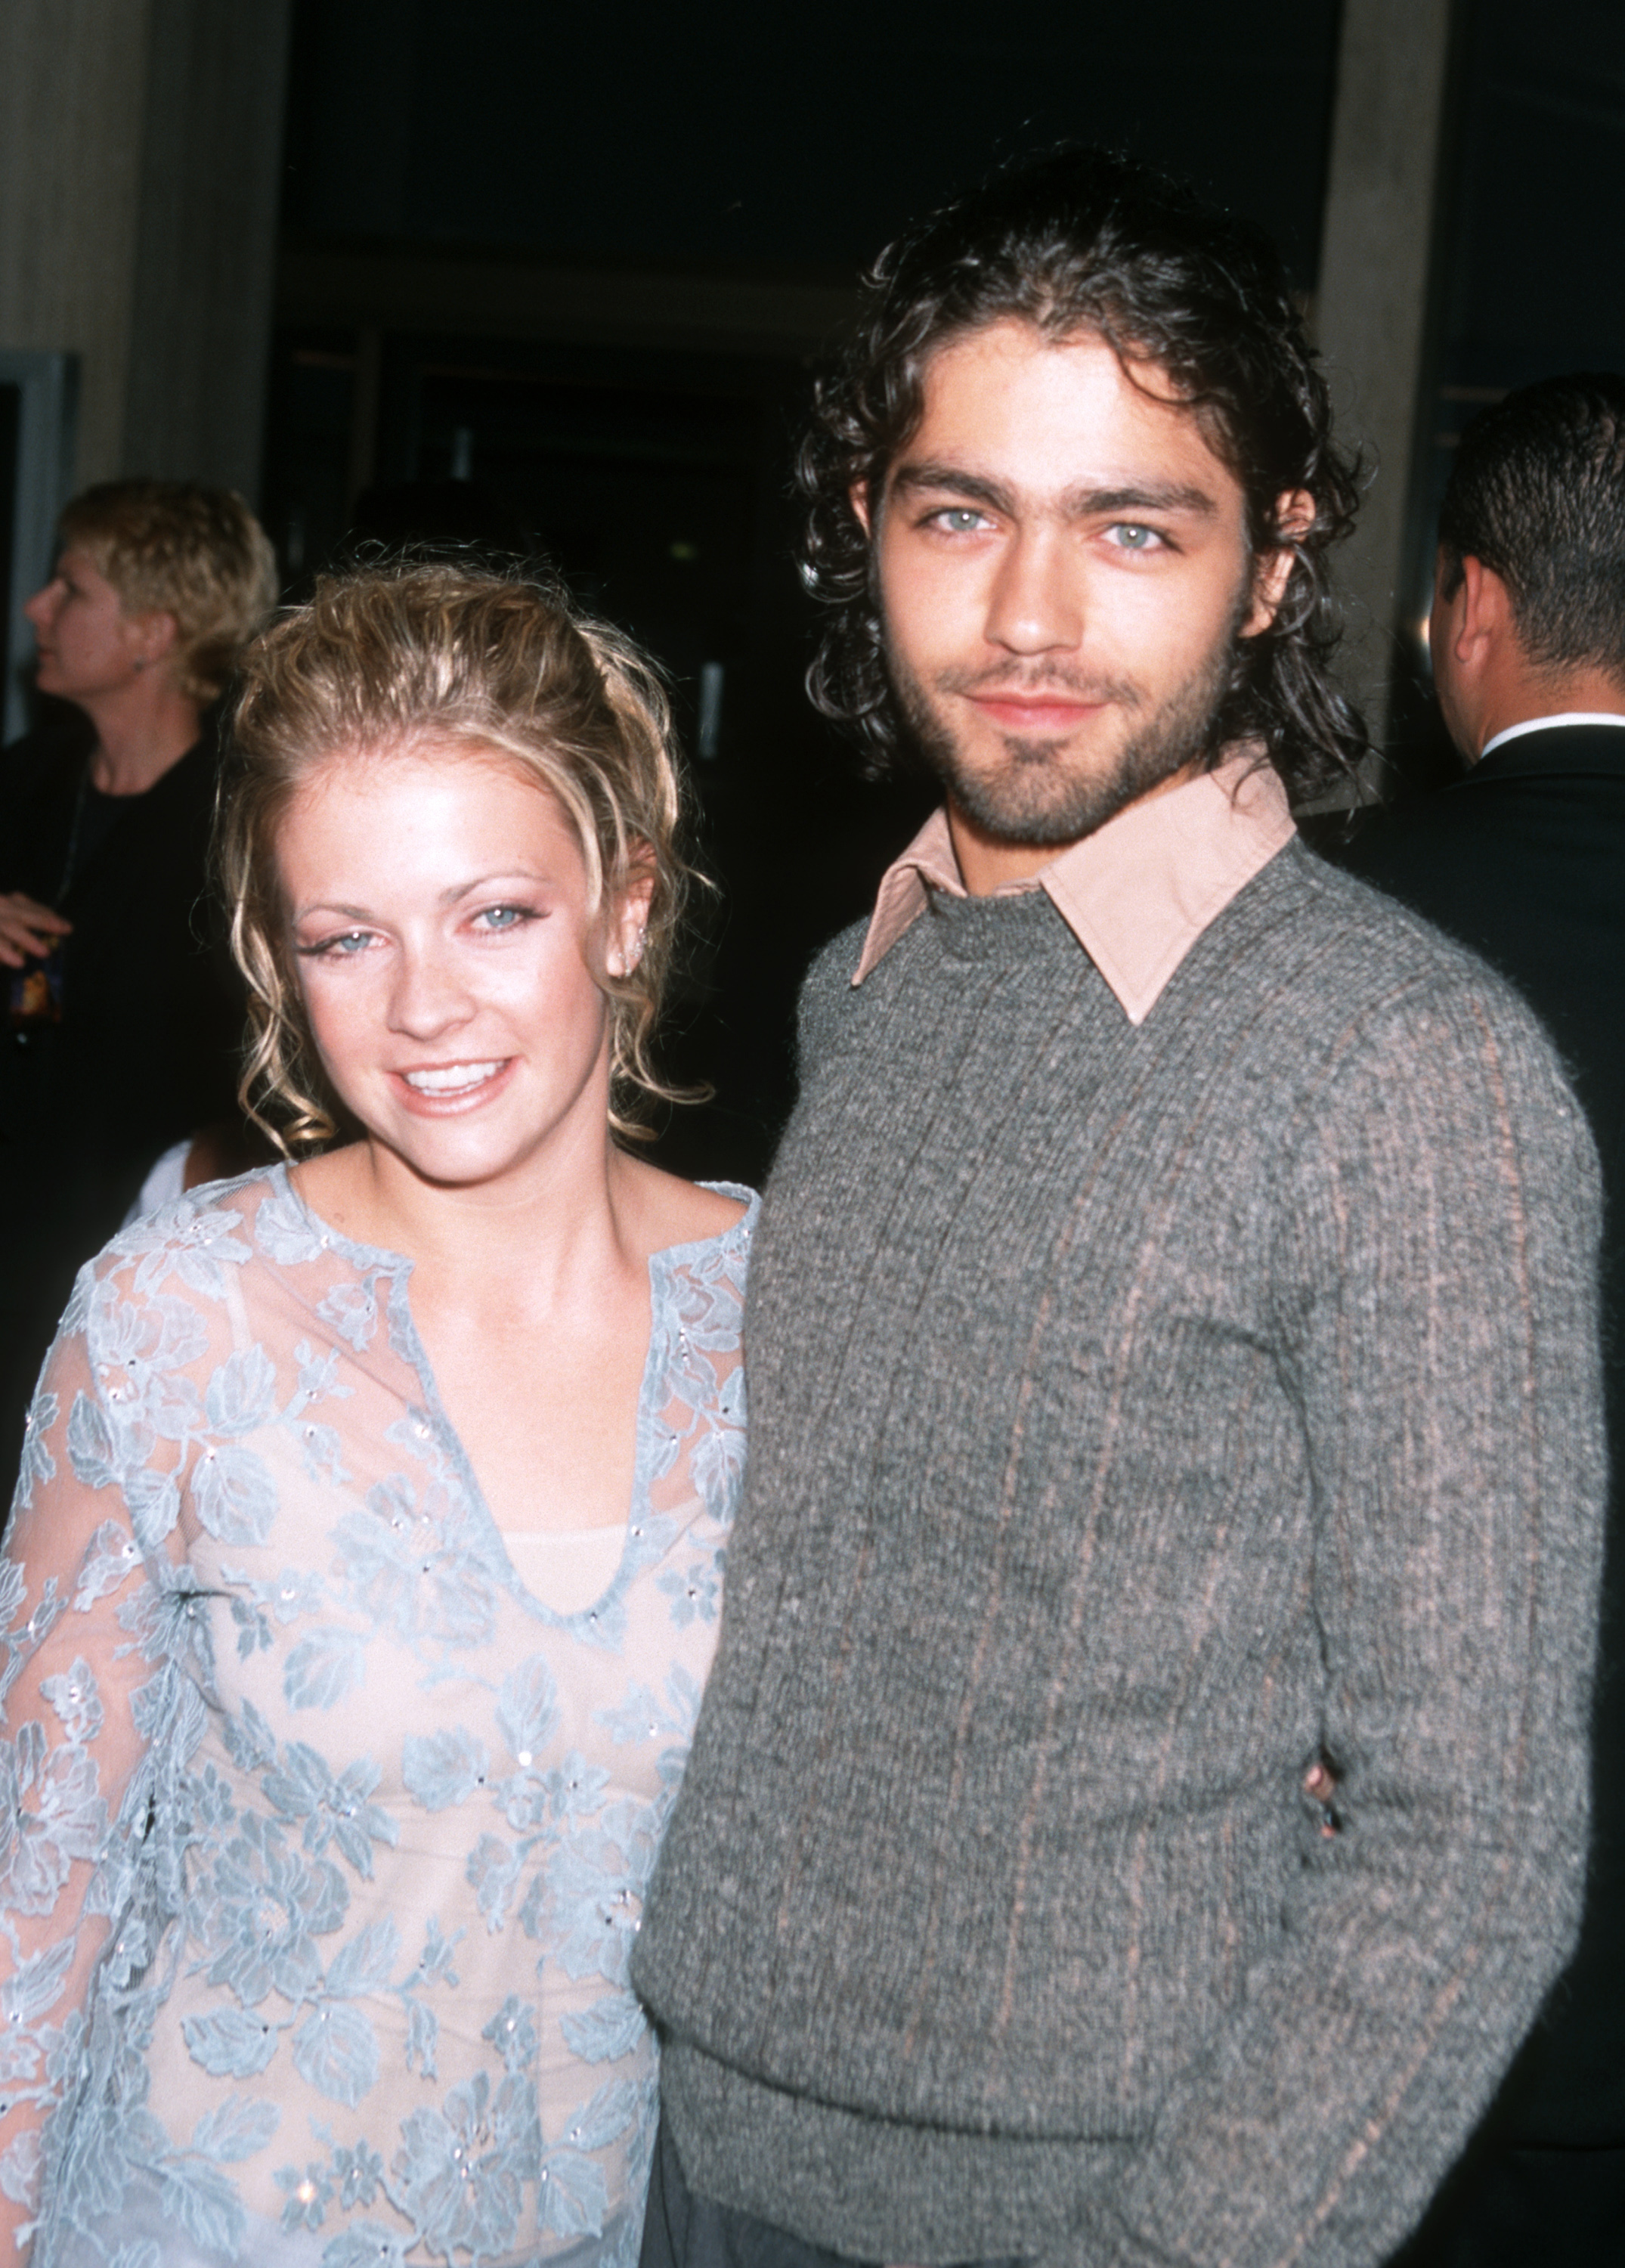 The child star and Adrian Grenier at the "Drive Me Crazy" premeire in Century City, California, on Septmber 22, 1999. | Source: Getty Images